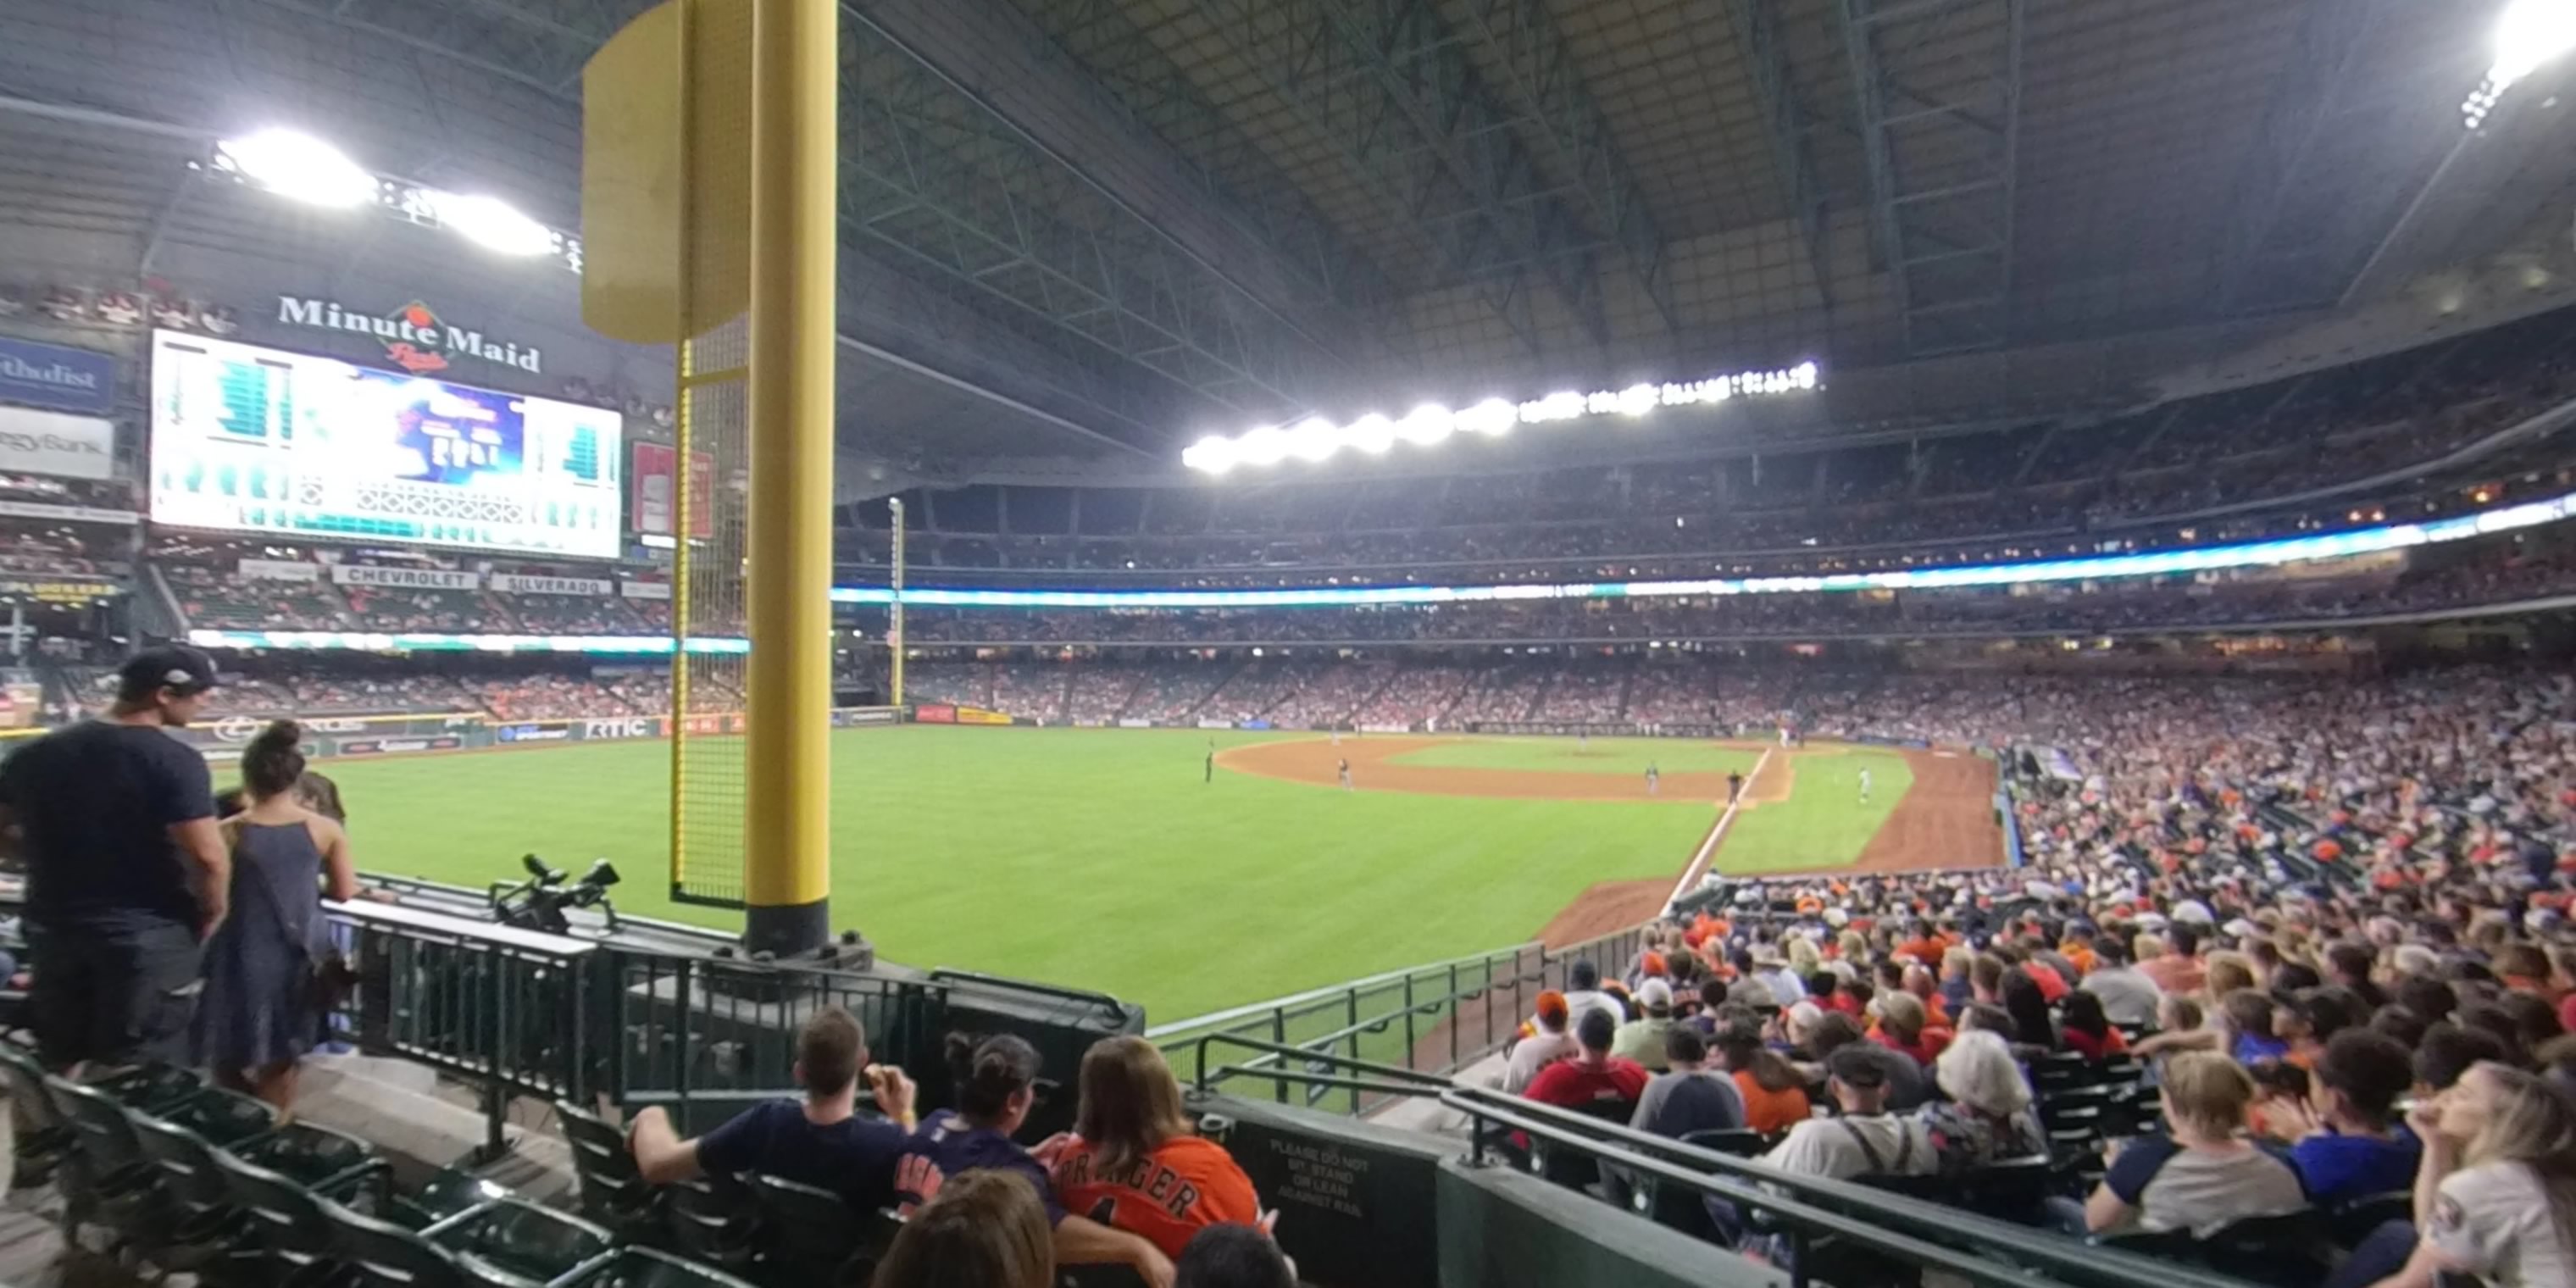 Section 104 at Minute Maid Park 